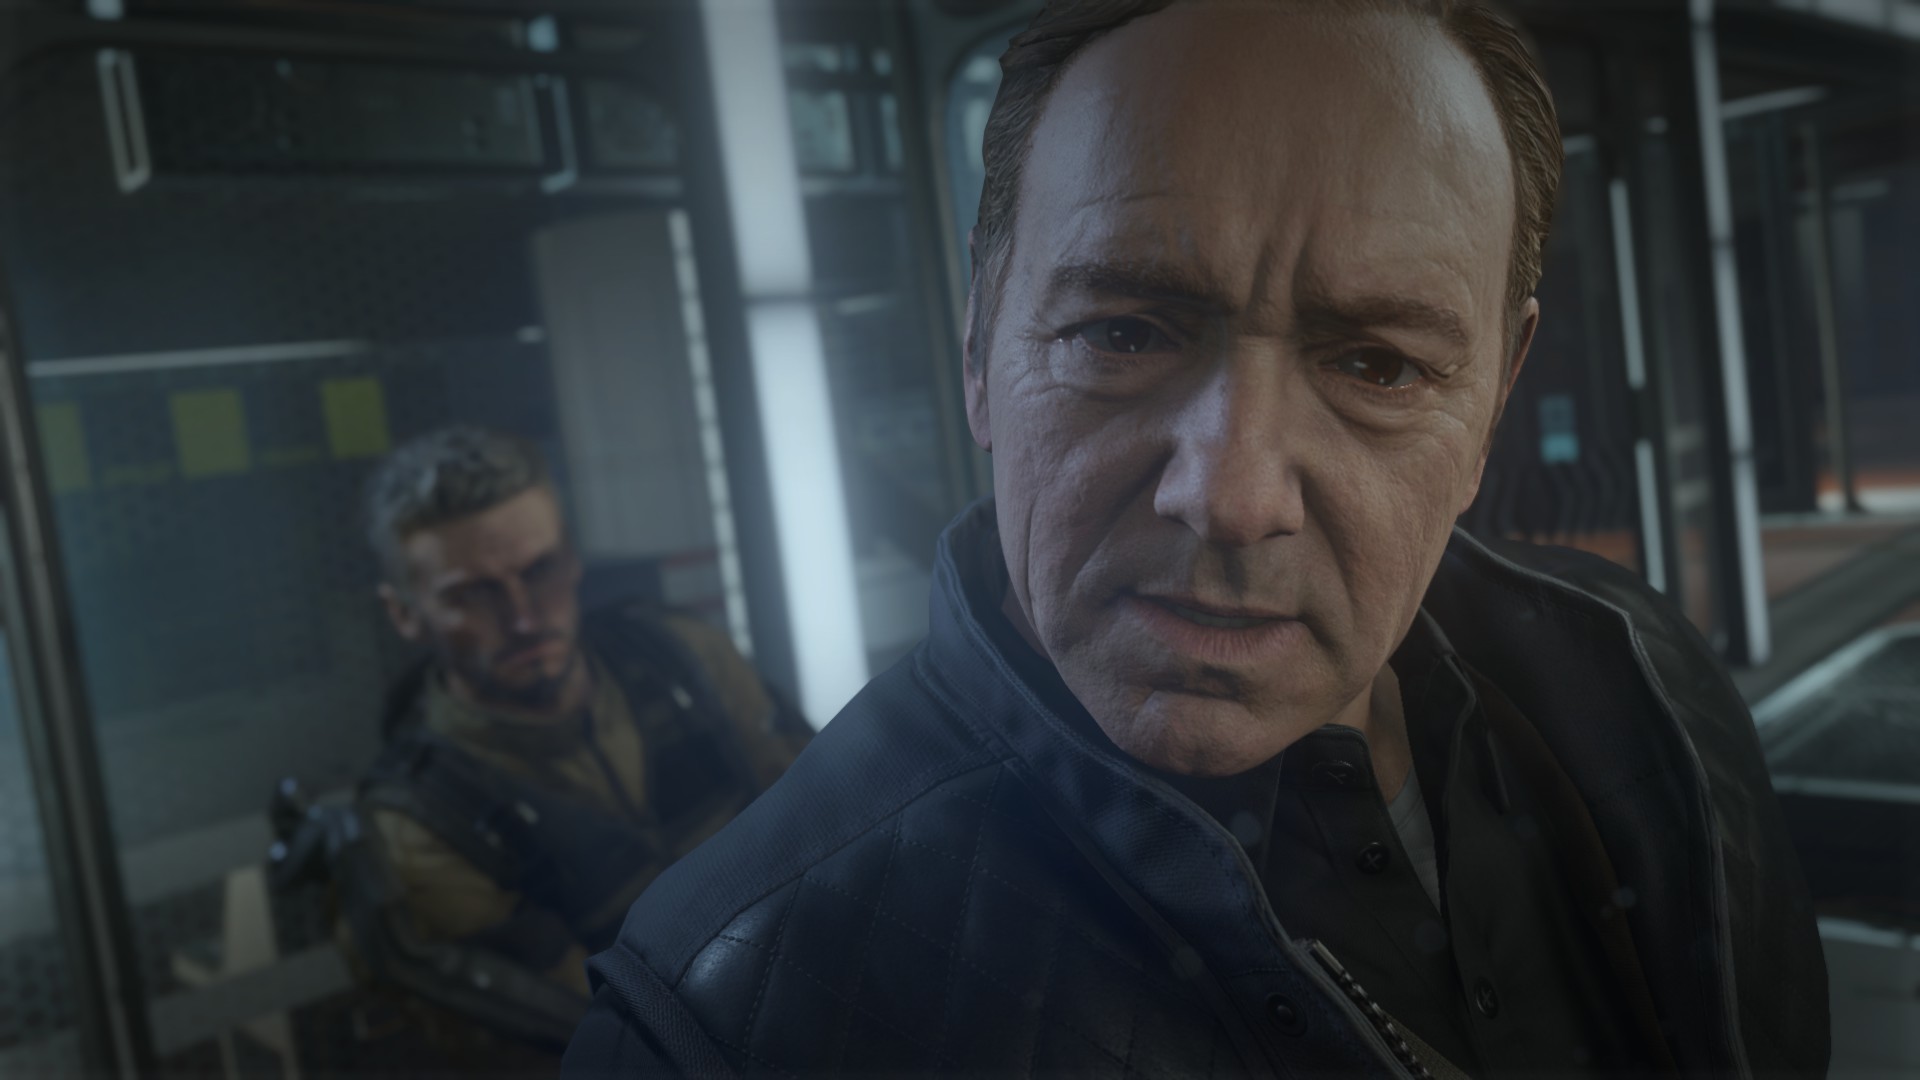 Free download wallpaper Call Of Duty, Video Game, Call Of Duty: Advanced Warfare on your PC desktop